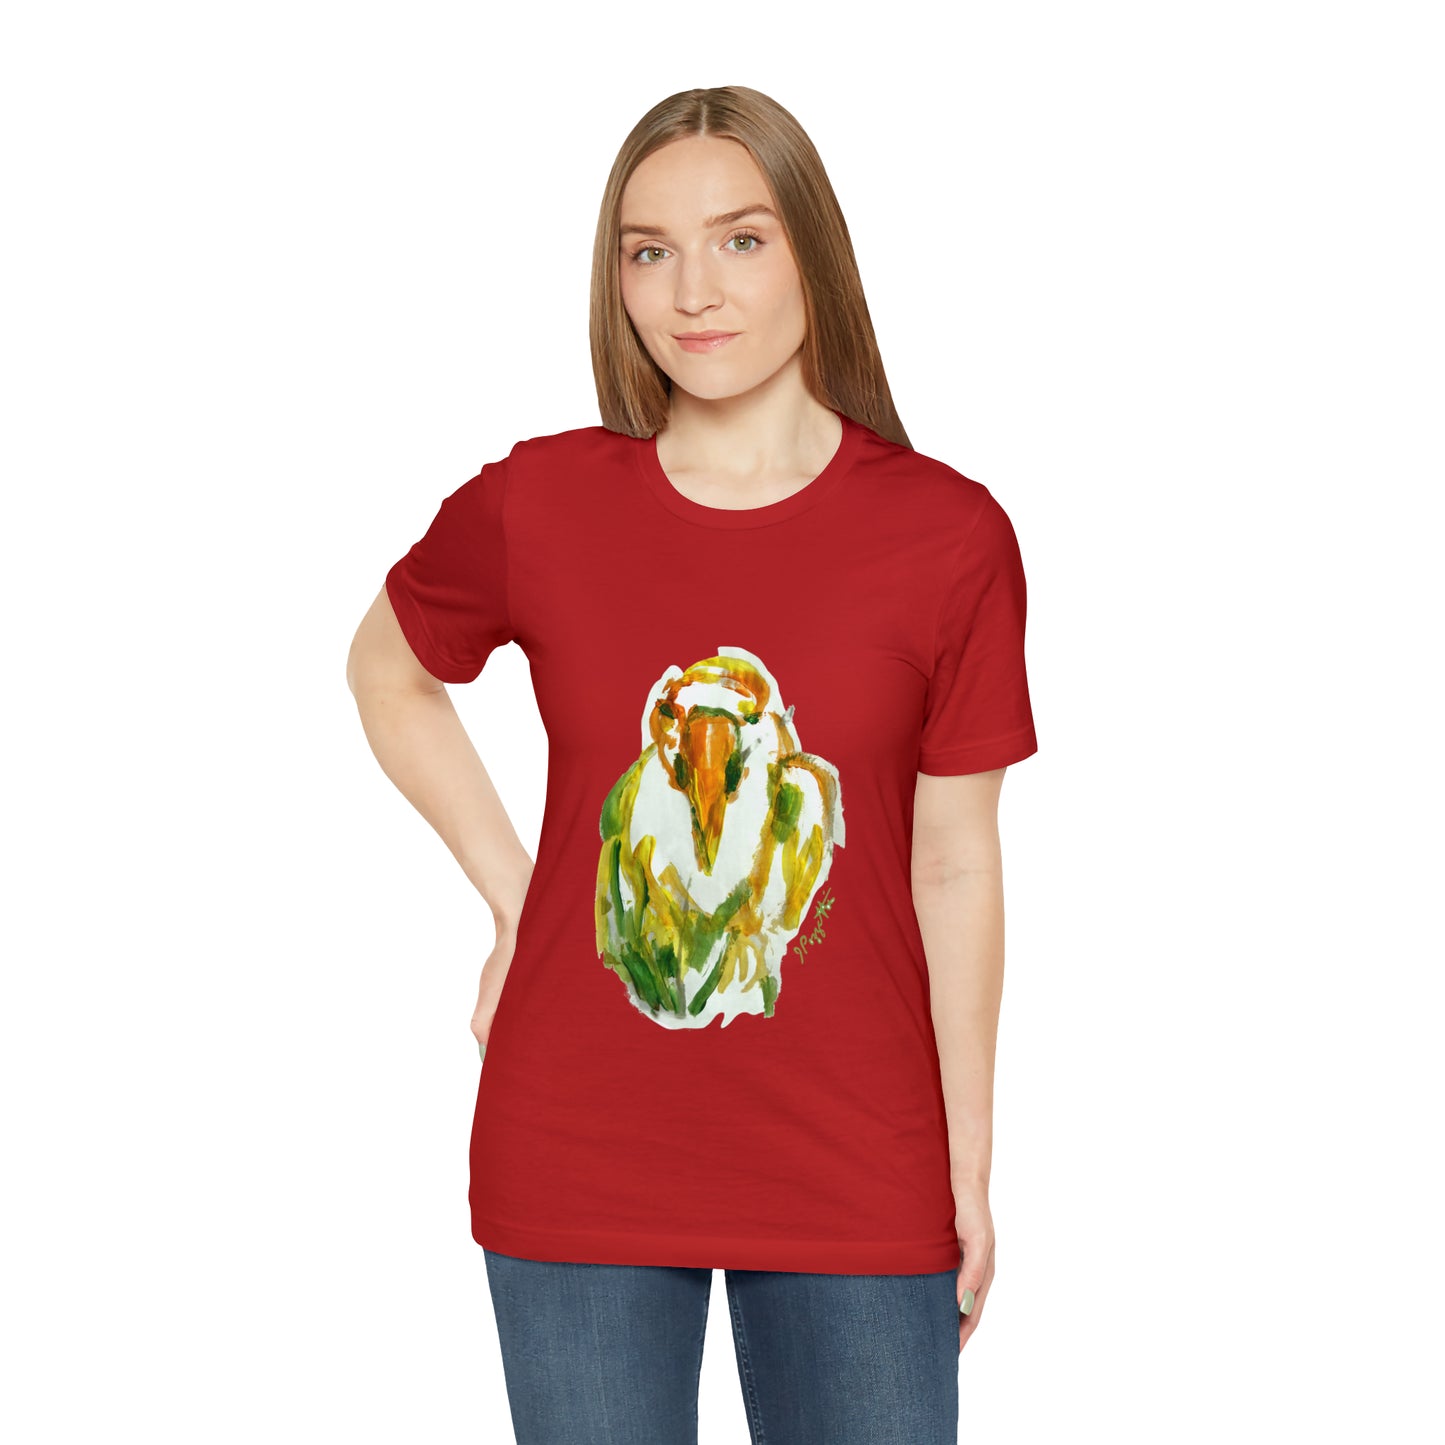 BIRD Watercolor Painting on T Shirt